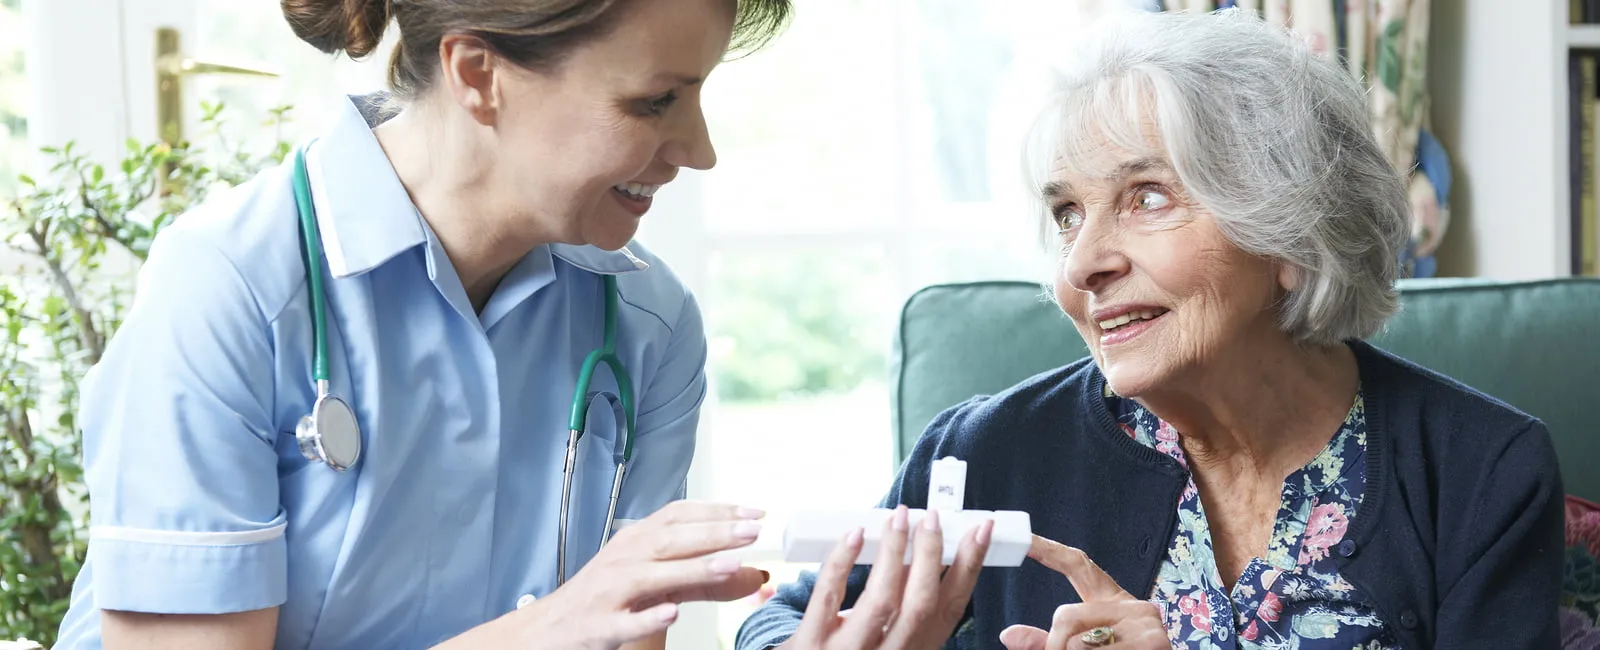 Helping Your Senior Loved Ones Maintain Their Independence With Medication Management